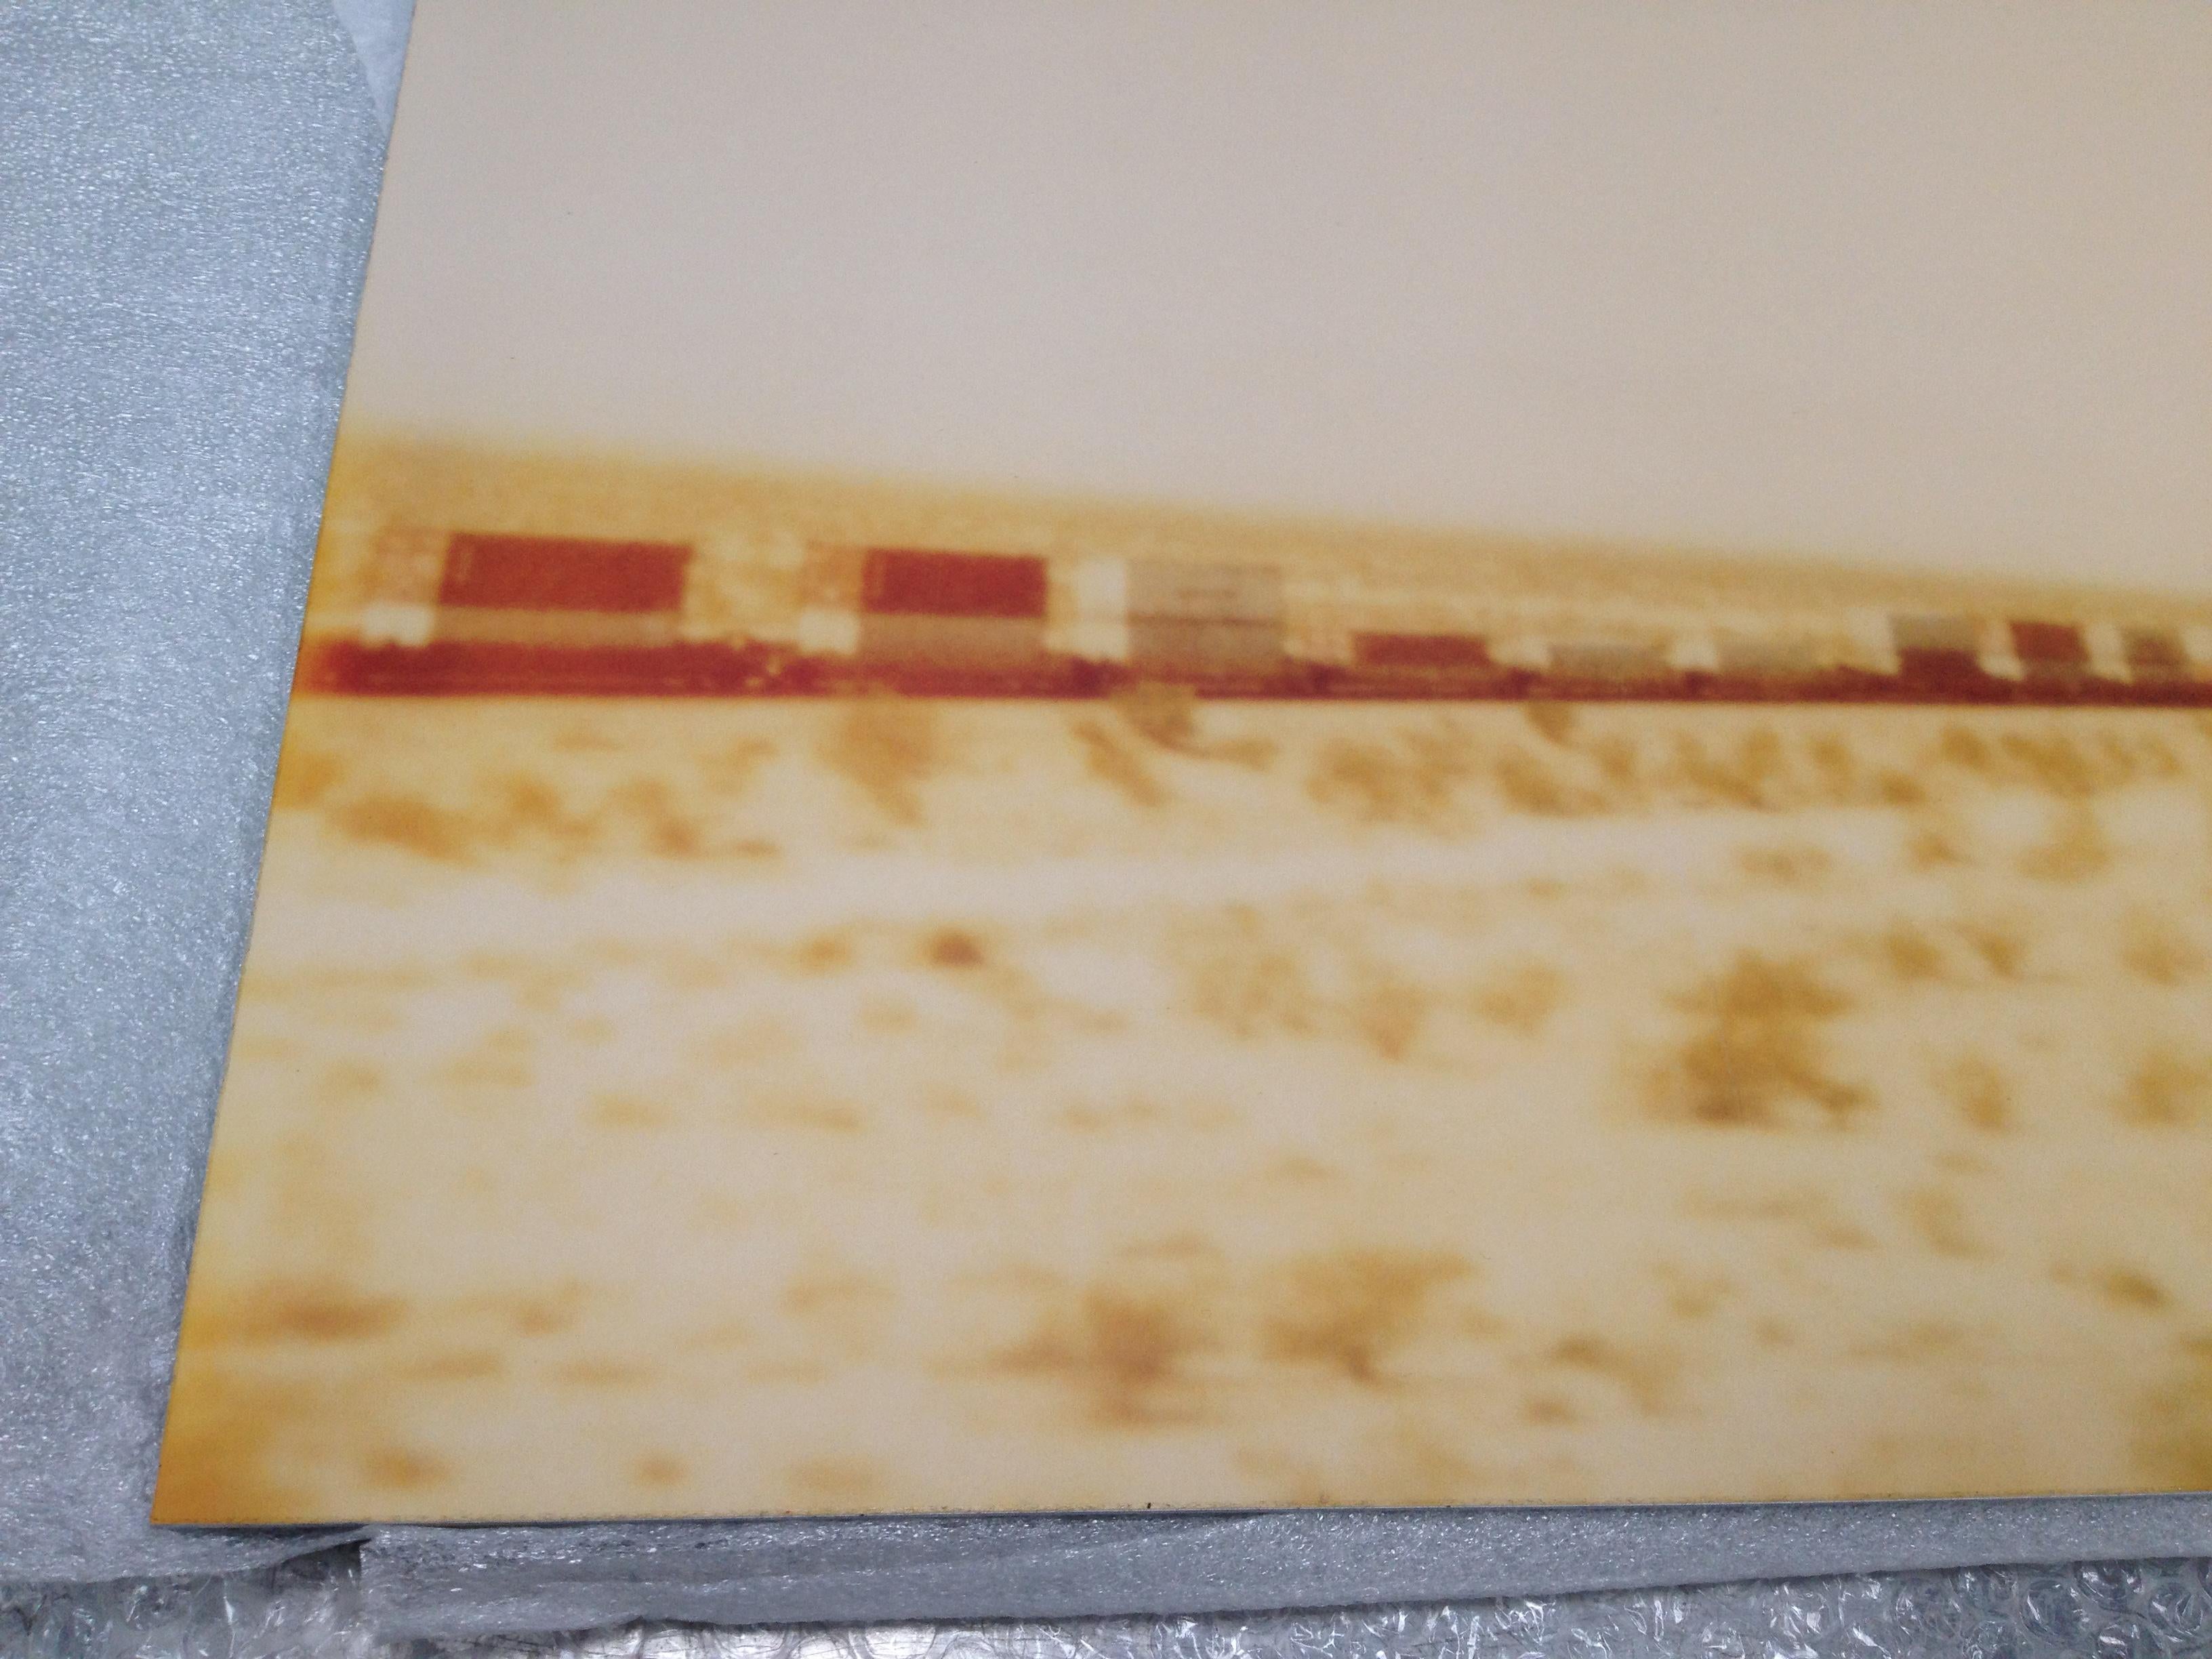 Train crosses Plain (Wastelands) 
Edition 2/5, 55x72cm, 1999,
analog C-Print, hand-printed by the artist on Fuji Crystal Archive Paper,
based on an expired Polaroid, 
Artist inventory Number 544.
Mounted on Aluminum with matte UV-Protection.
Signed